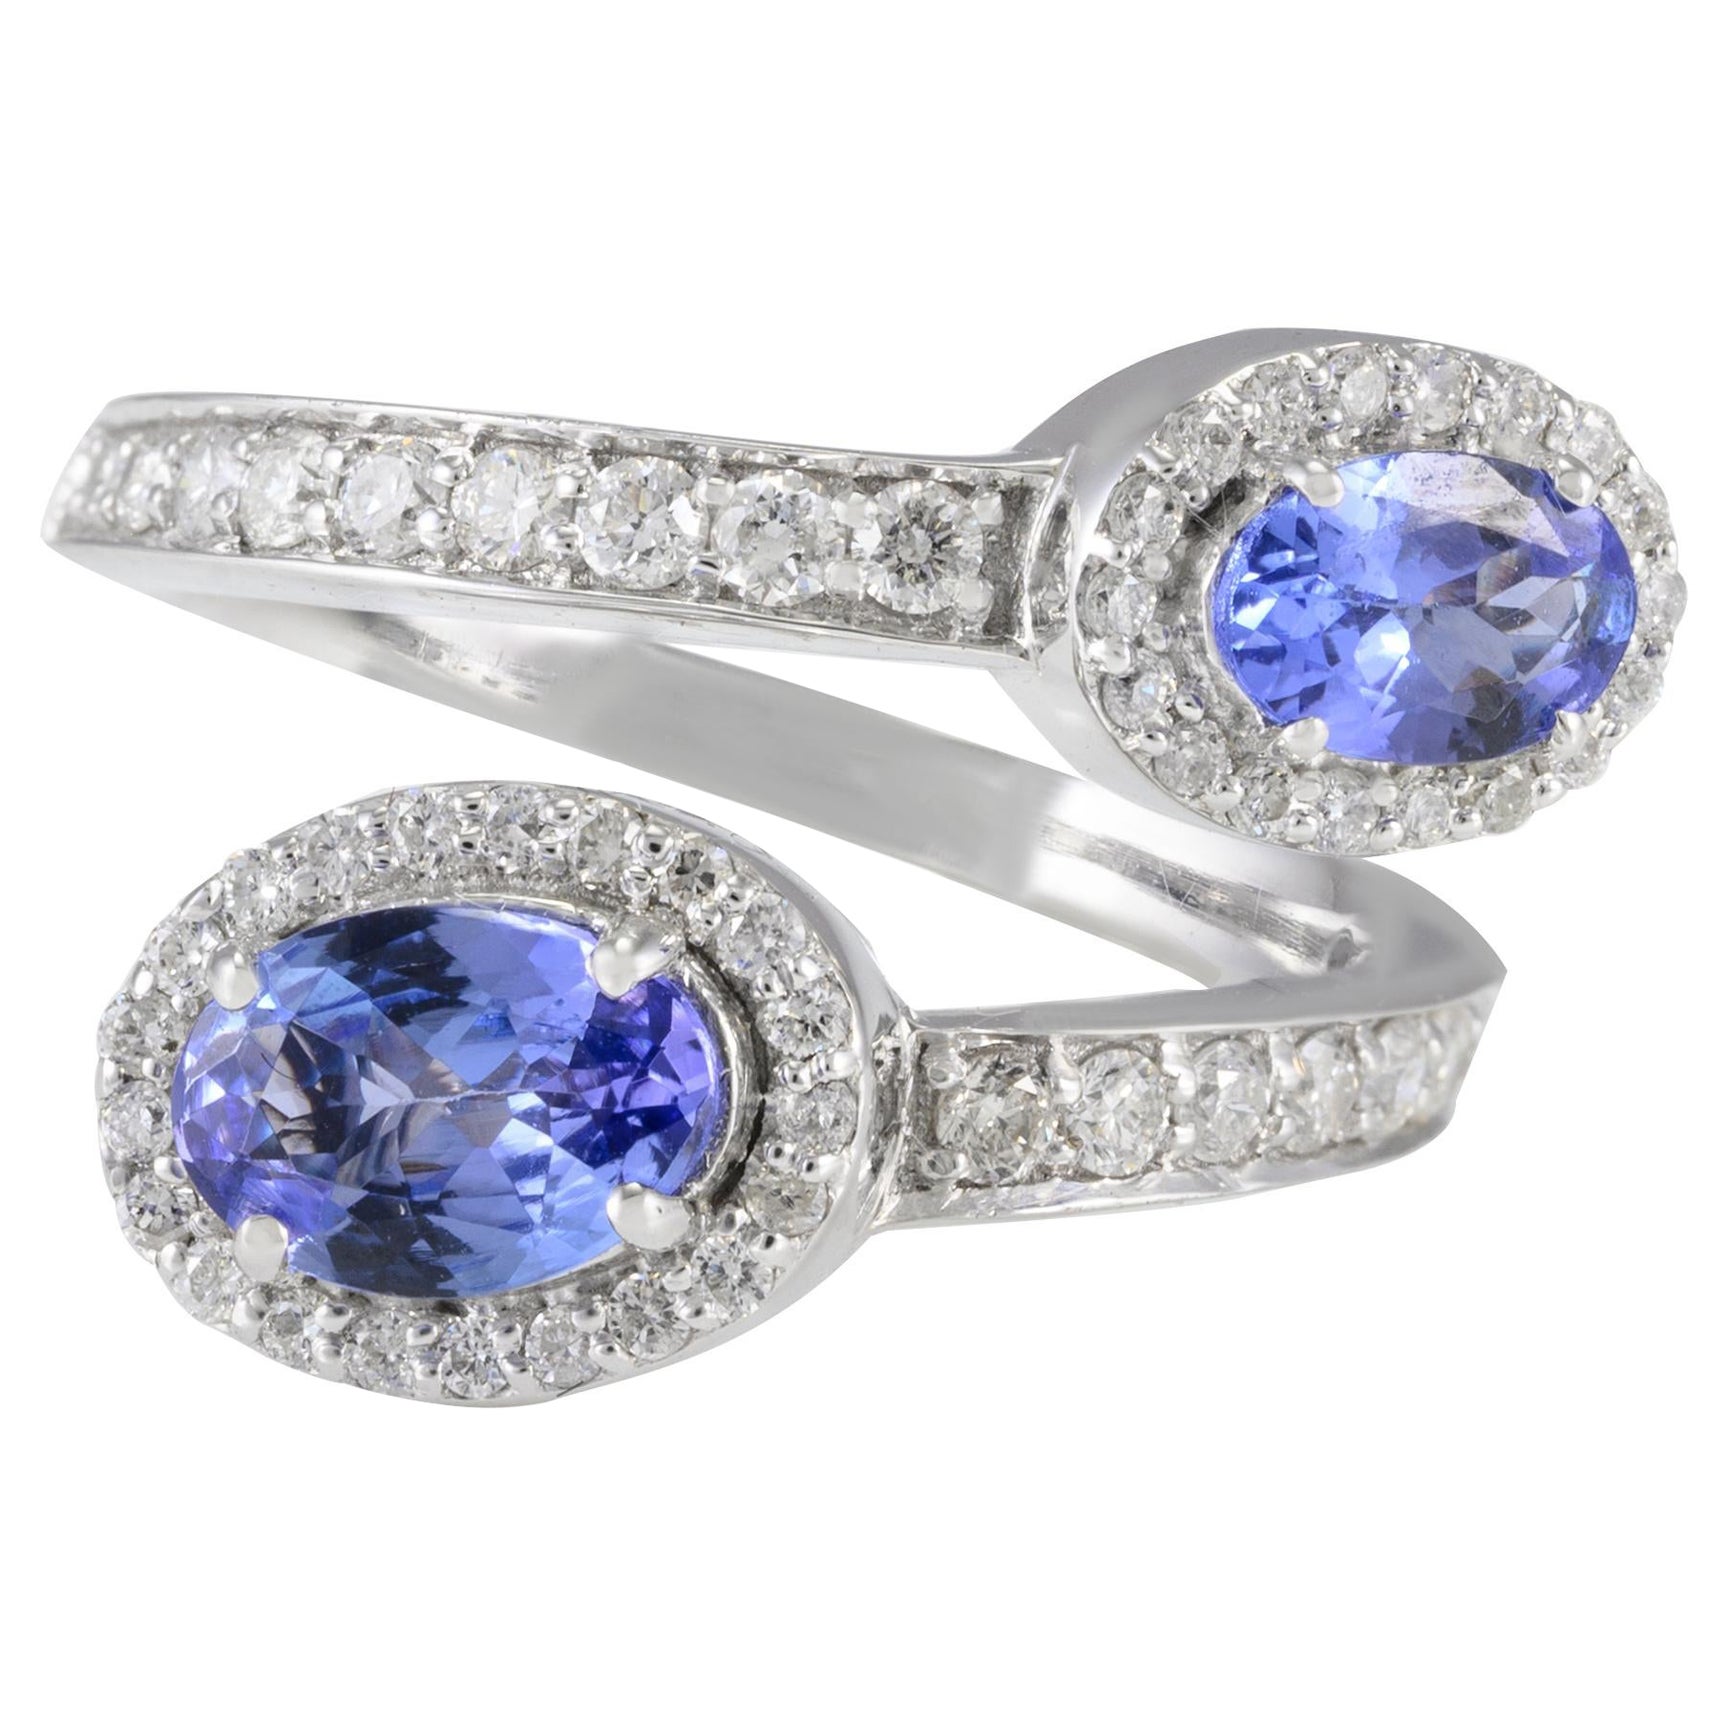 For Sale:  14k White Gold 1.04ct Genuine Oval Tanzanite and Halo Diamond Bypass Ring